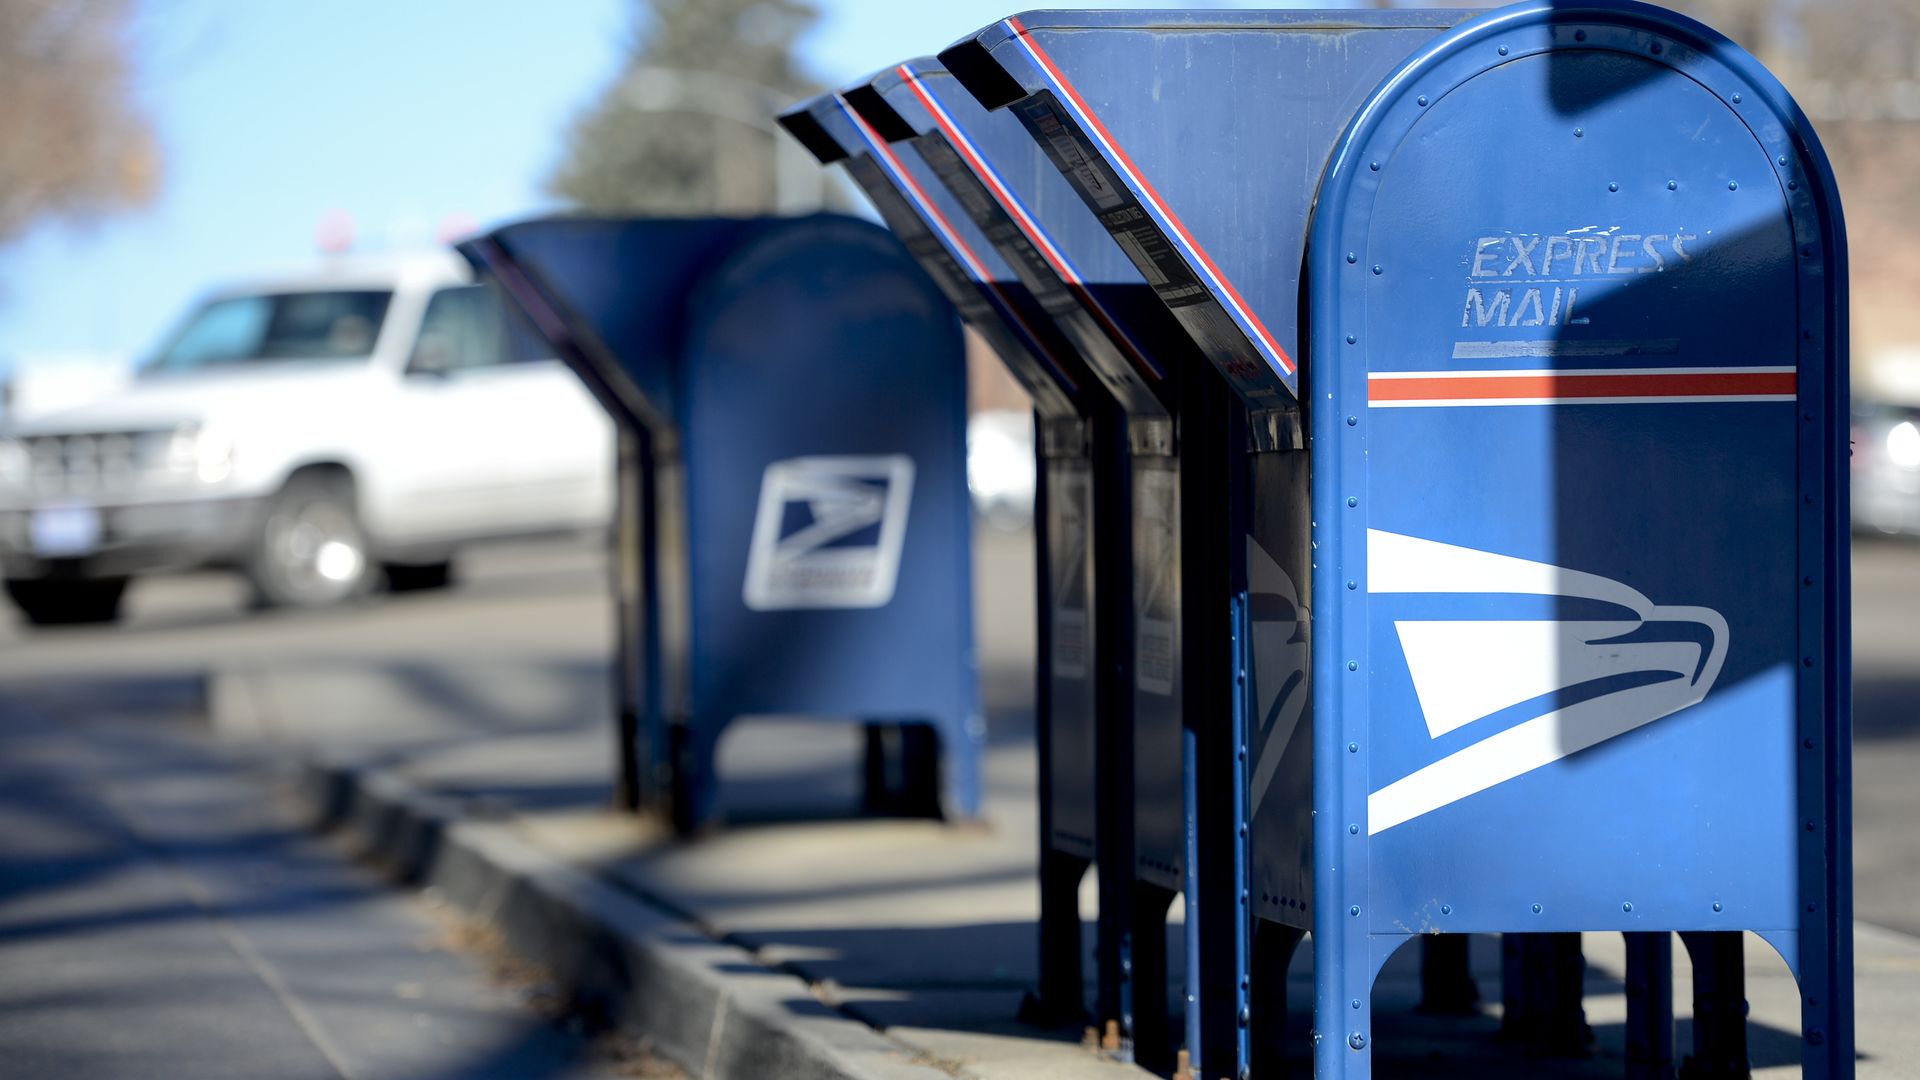 USPS mail boxes in Longmont, Colorado.